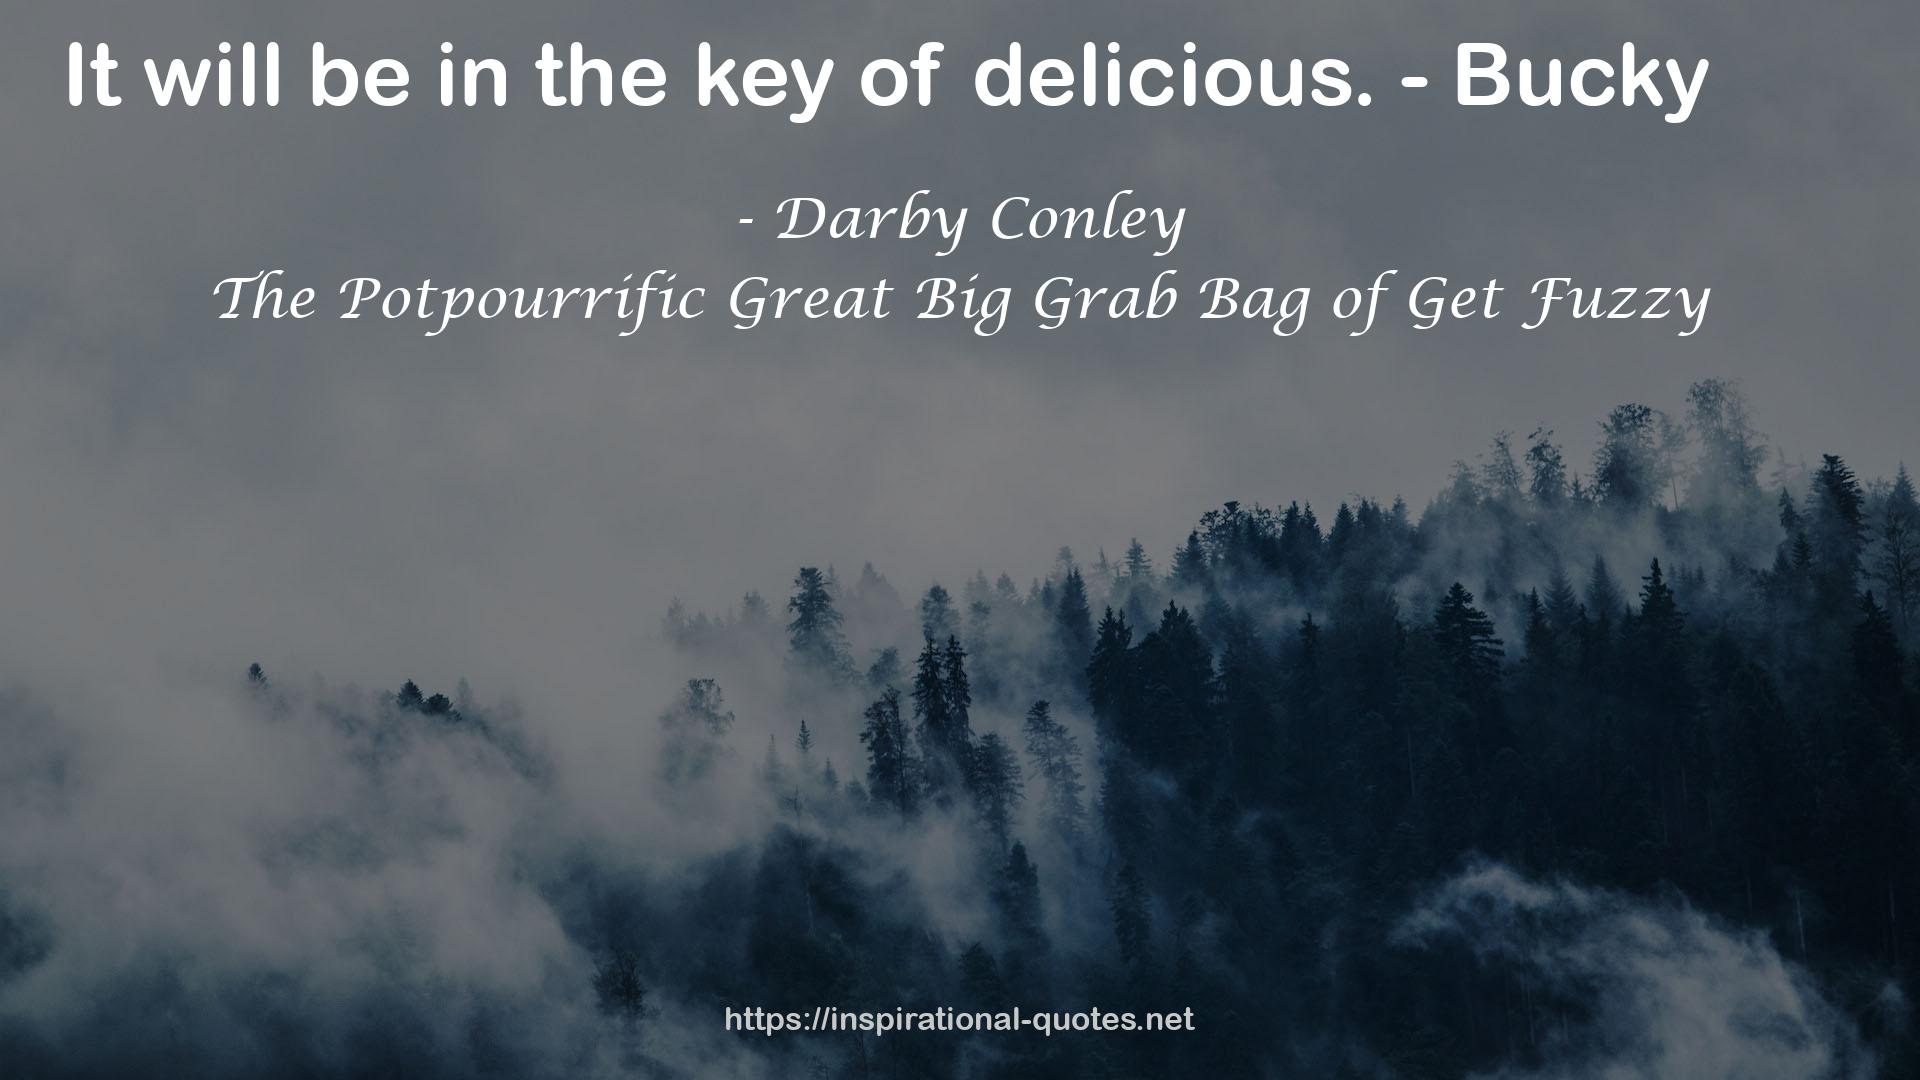 The Potpourrific Great Big Grab Bag of Get Fuzzy QUOTES